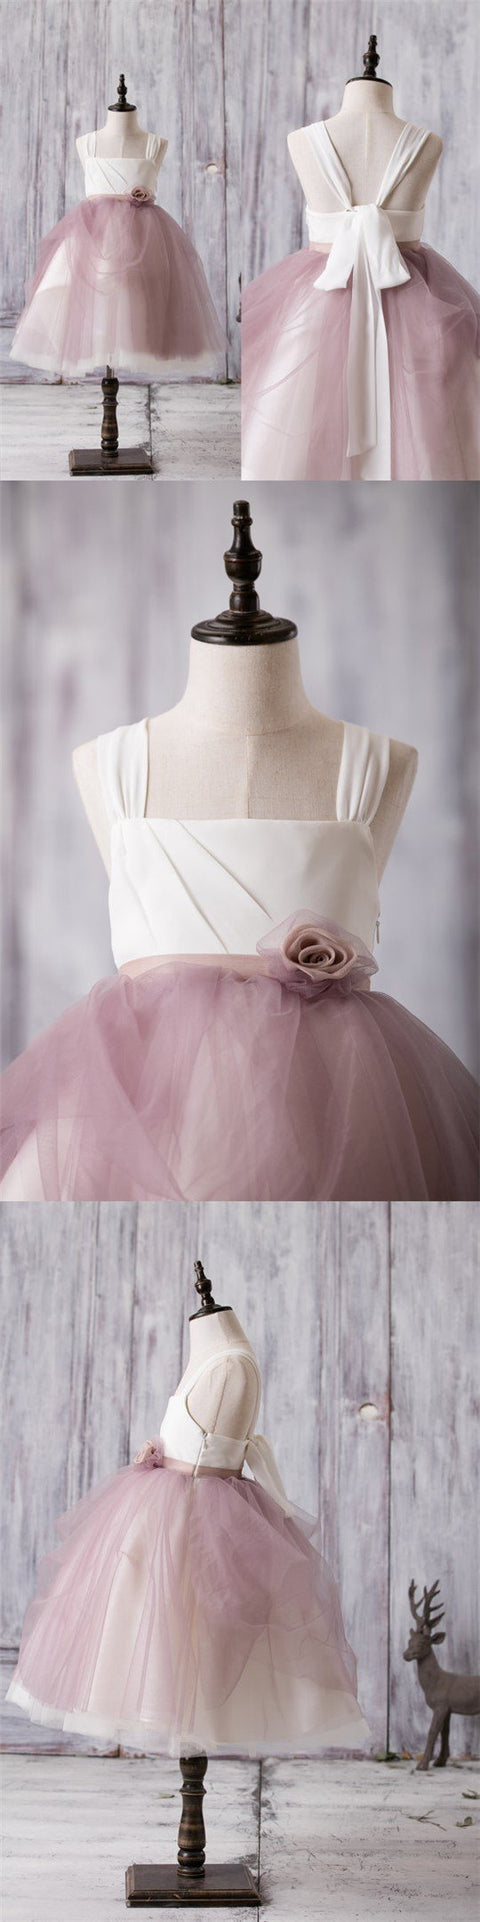 Newest Arrival Strap White Top Dusty Rose Tulle Cute Flower Girl Dresses, FG012